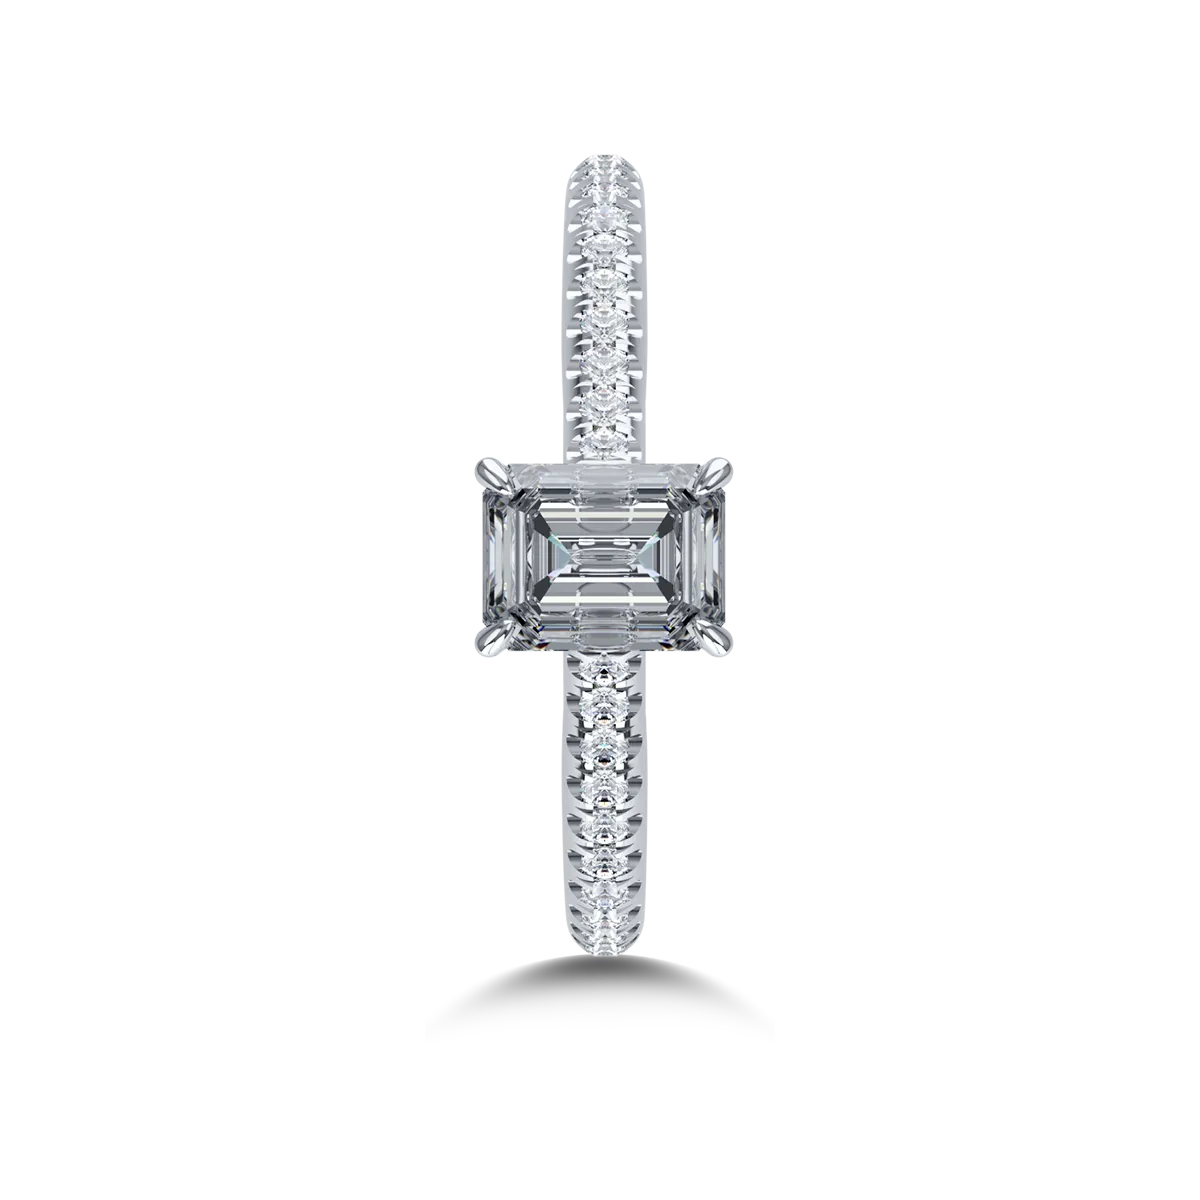 18K white gold engagement ring with 1.51ct diamond and 0.33ct diamonds